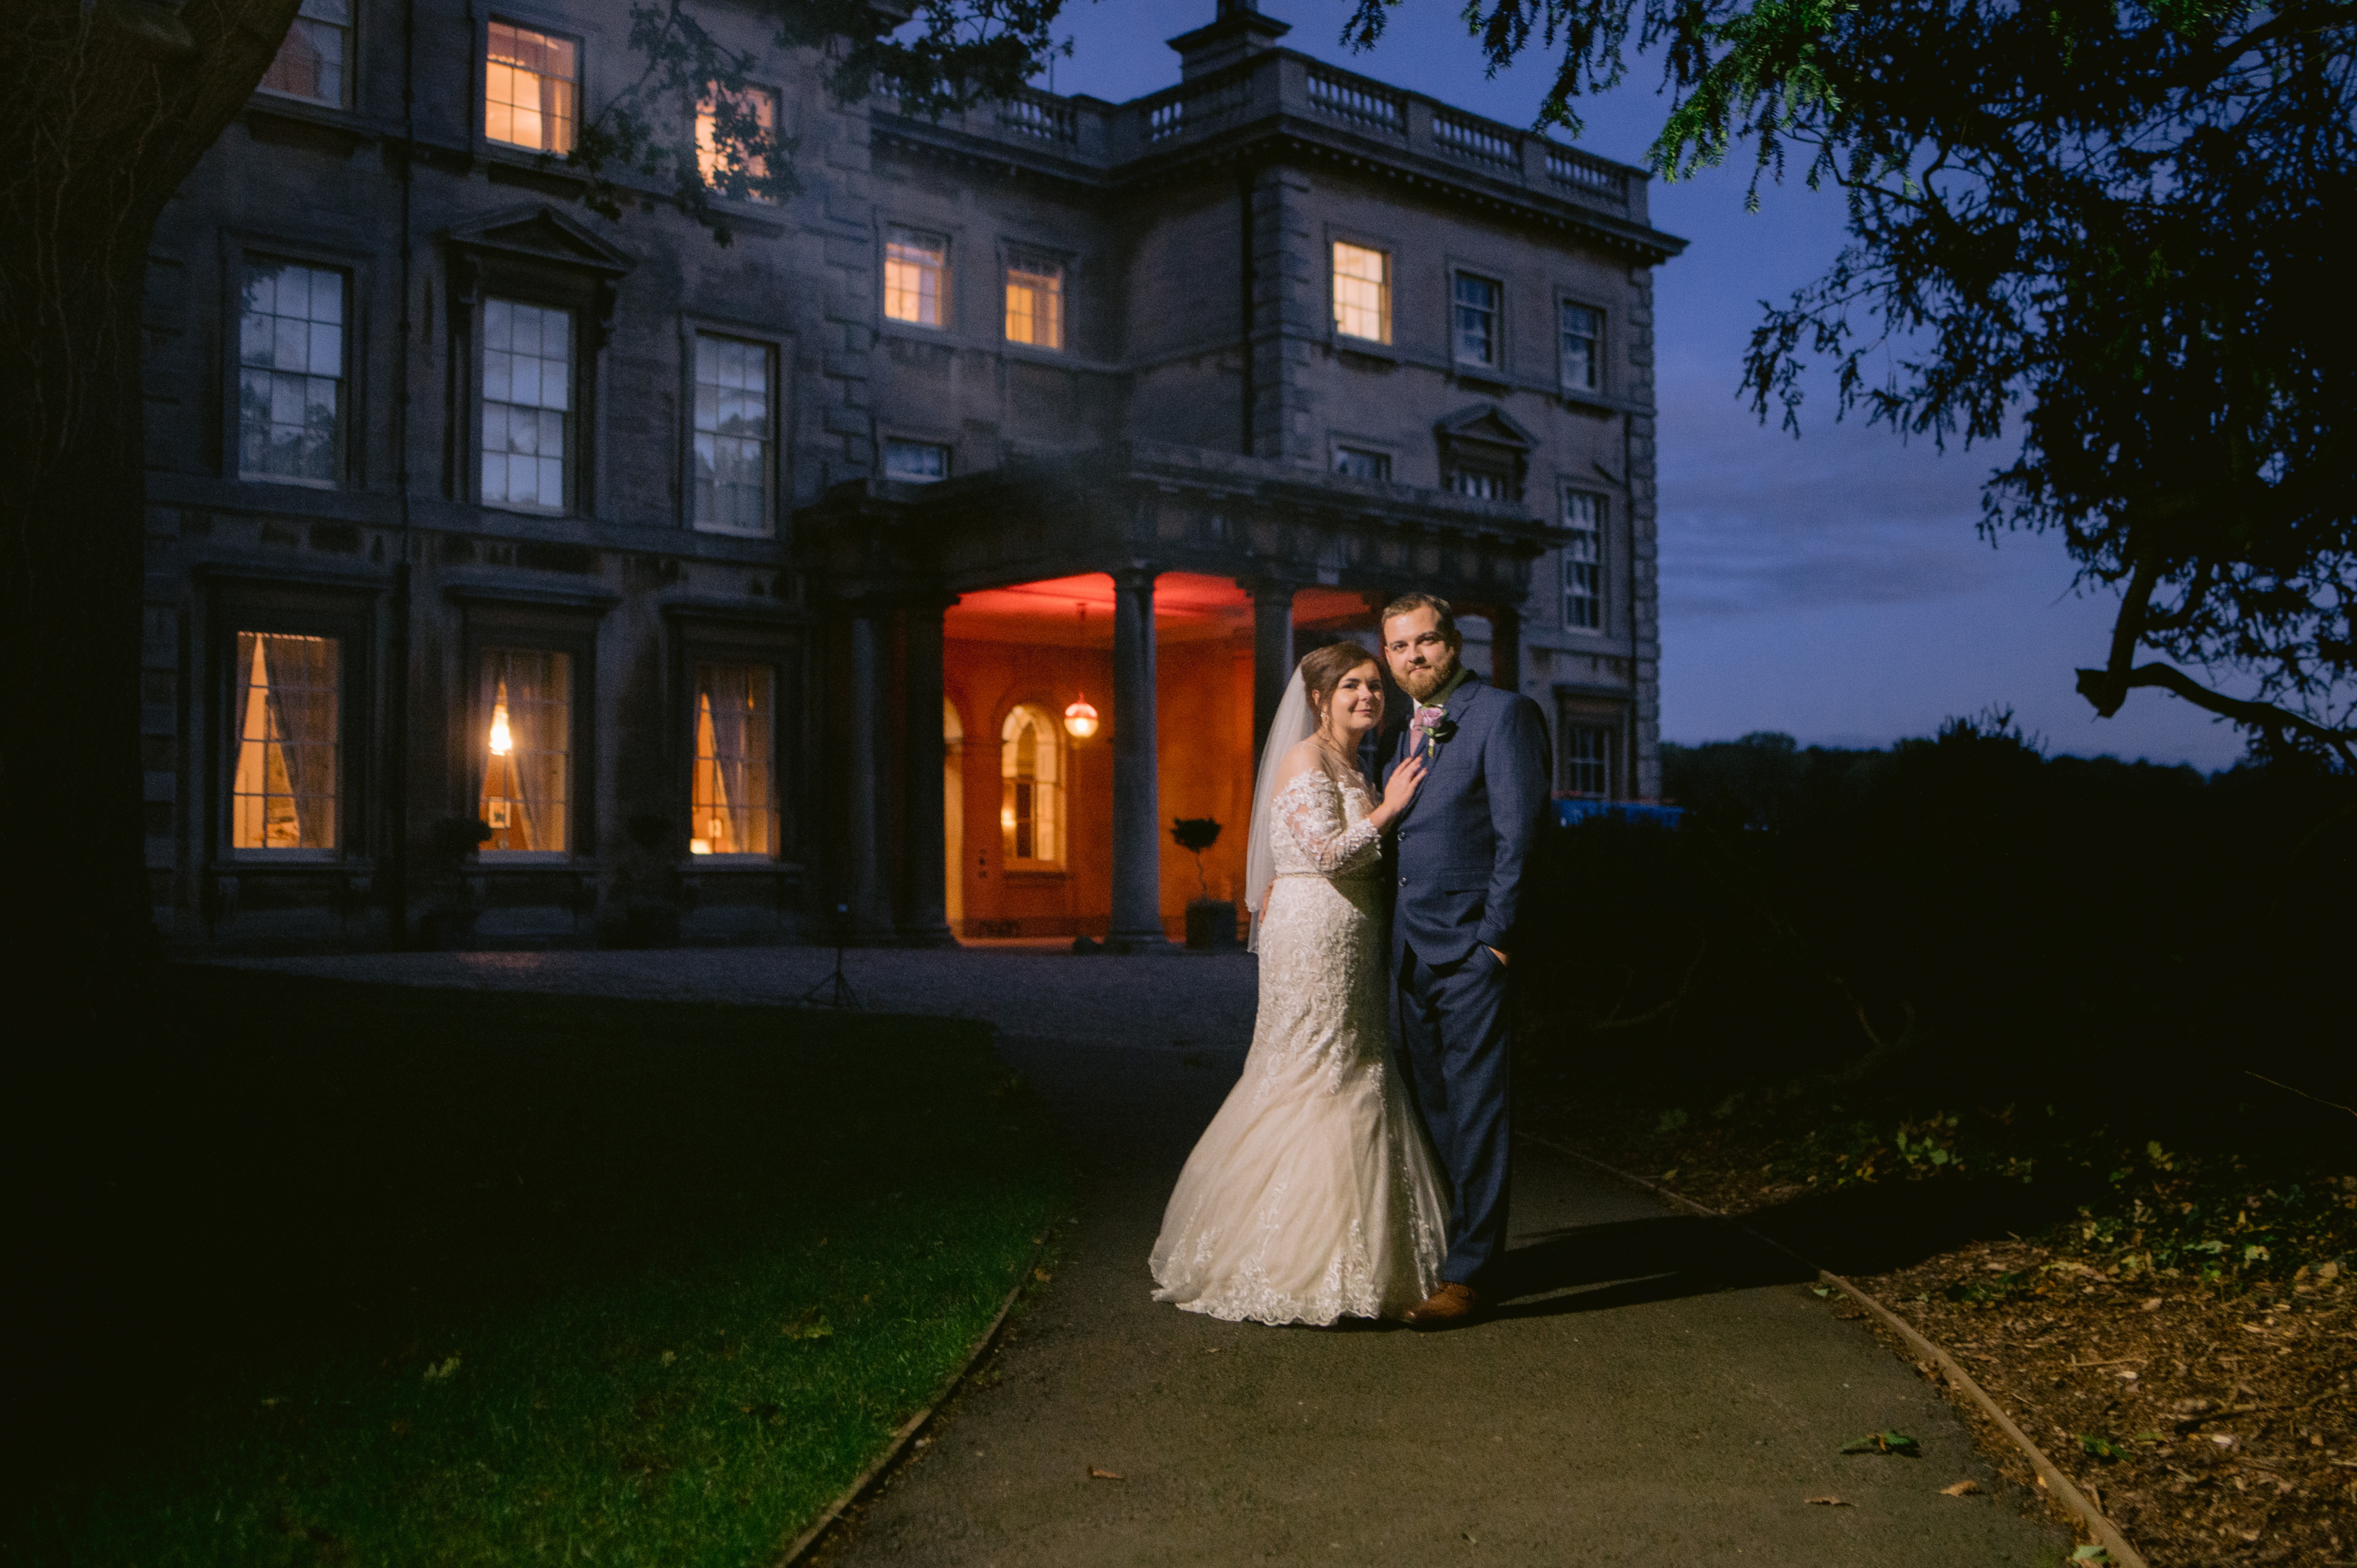 Wedding Venue in Bedfordshire by photographer S Howard Photography Ltd 